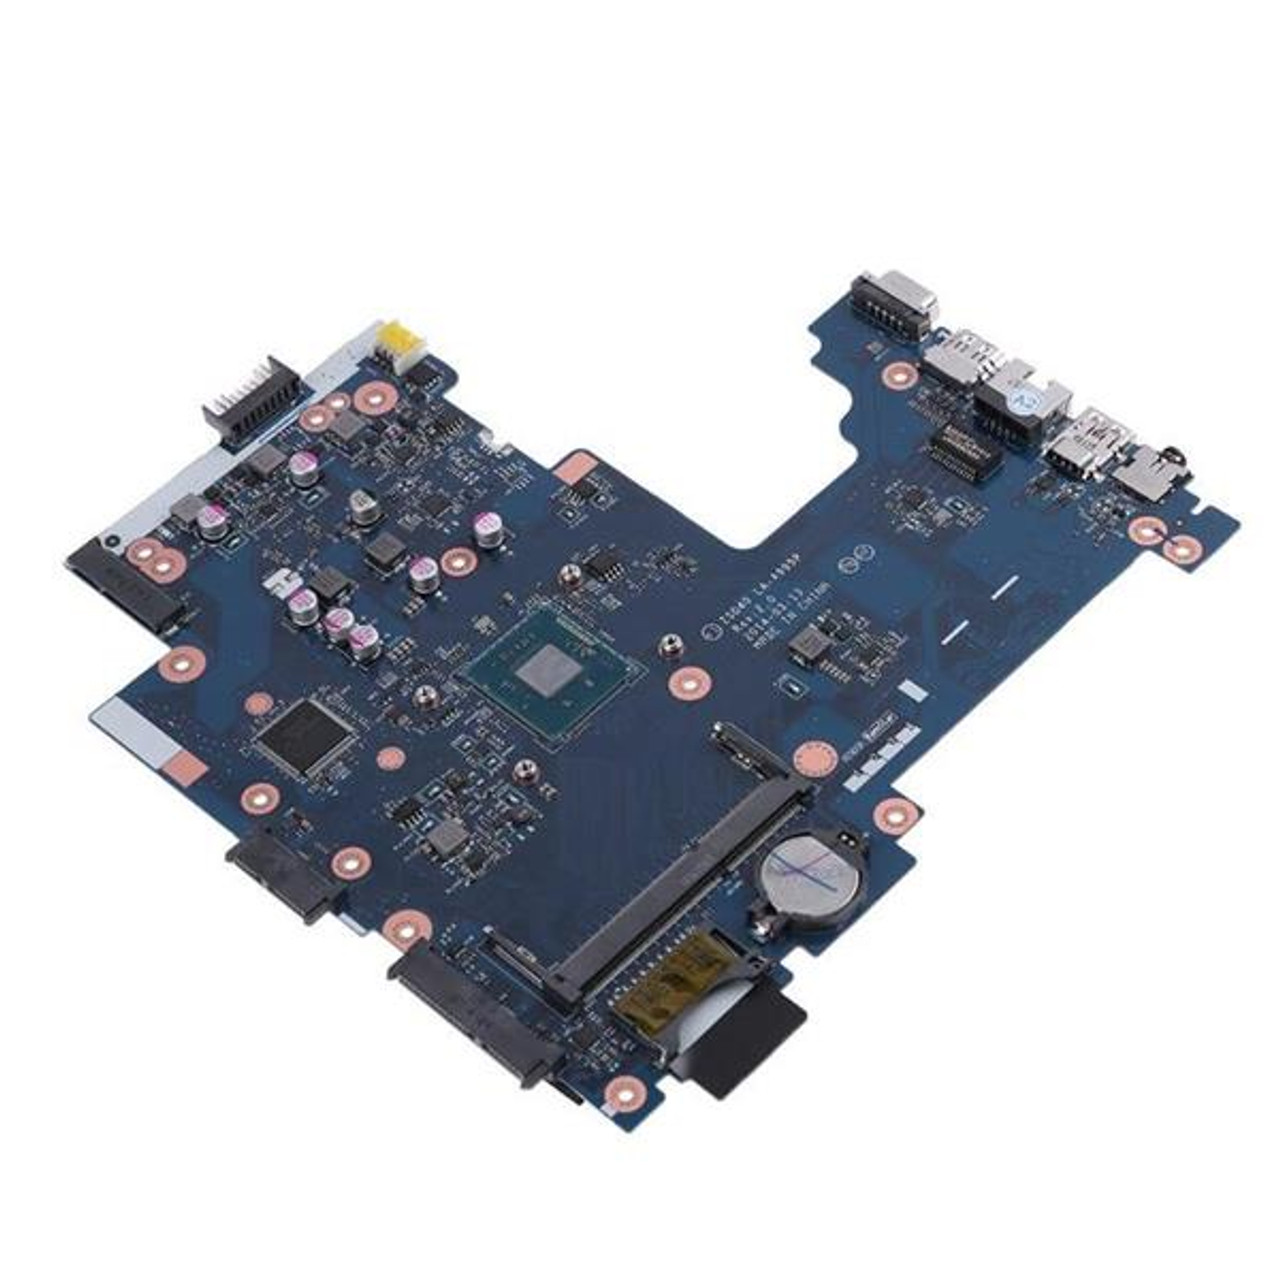 788004-001 HP System Board (Motherboard) With 2.16GHz Intel Celeron N2840 Processor for 14-r 240 G3 Notebook (Refurbished)